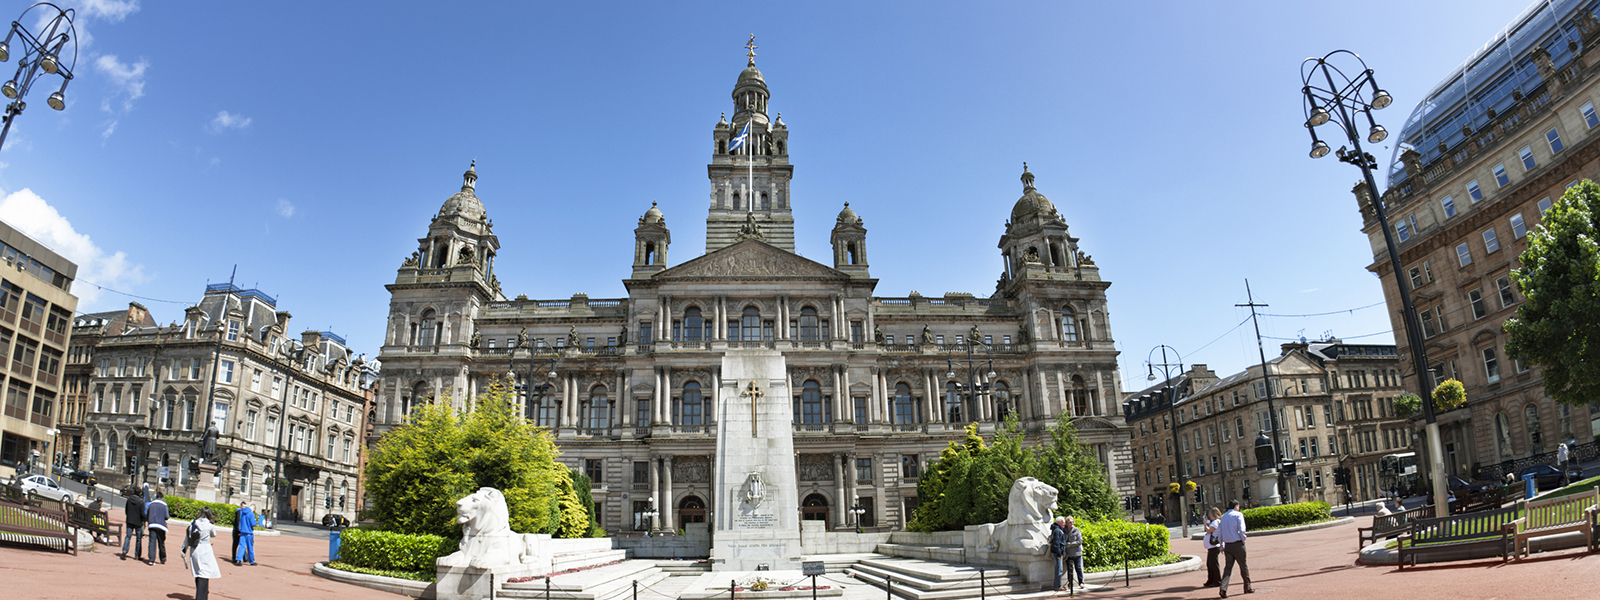 Glasgow City Chambers, George Square